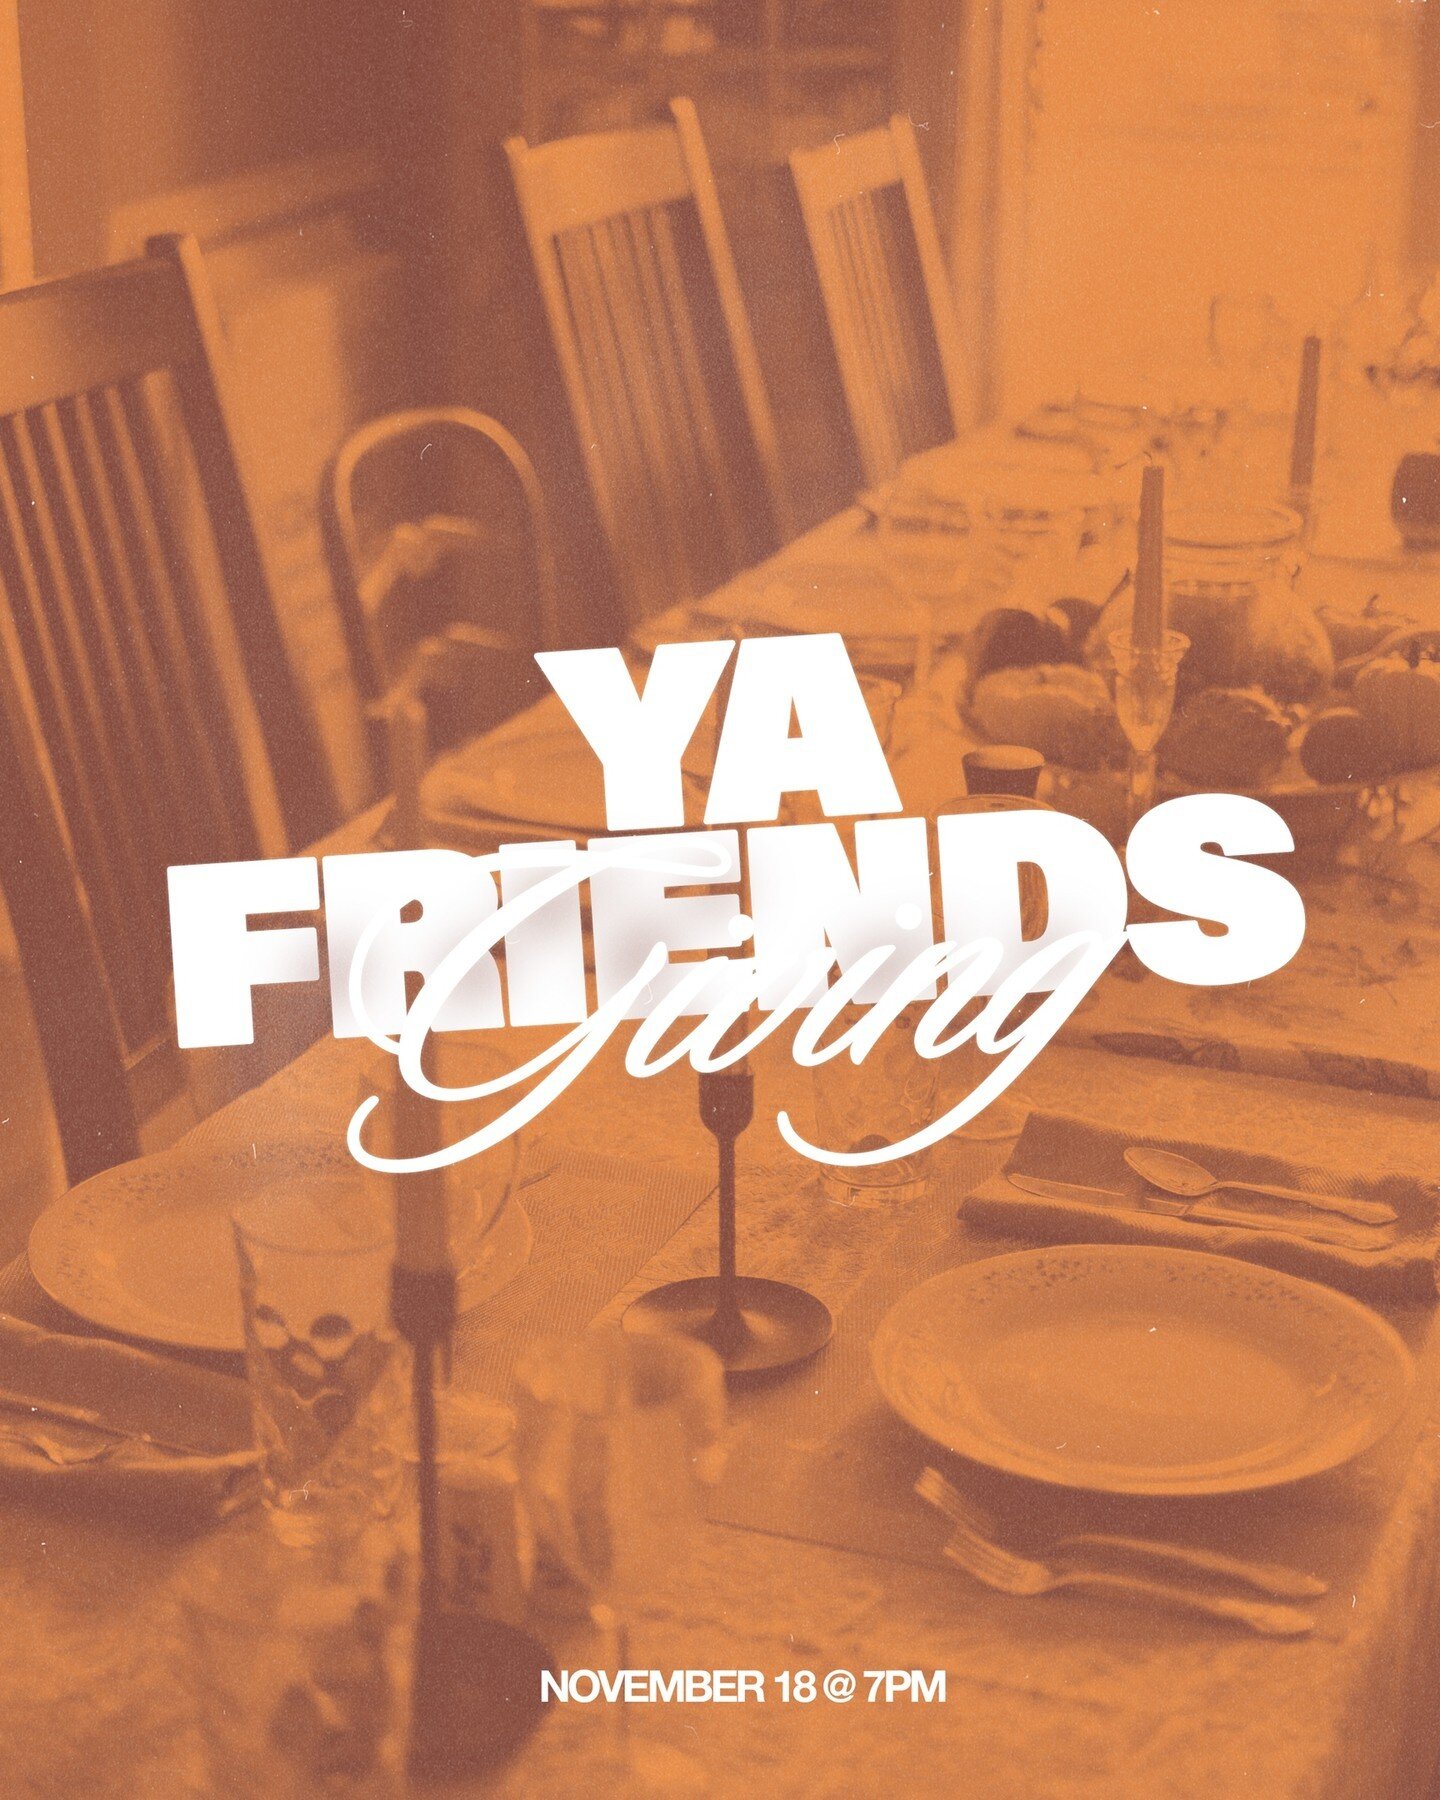 YA Friendsgiving happens next Friday at 7pm! Invite your friends to come with you! ⁠
⁠
Click the link in our bio to RSVP: https://cac.ccbchurch.com/goto/forms/526/responses/new